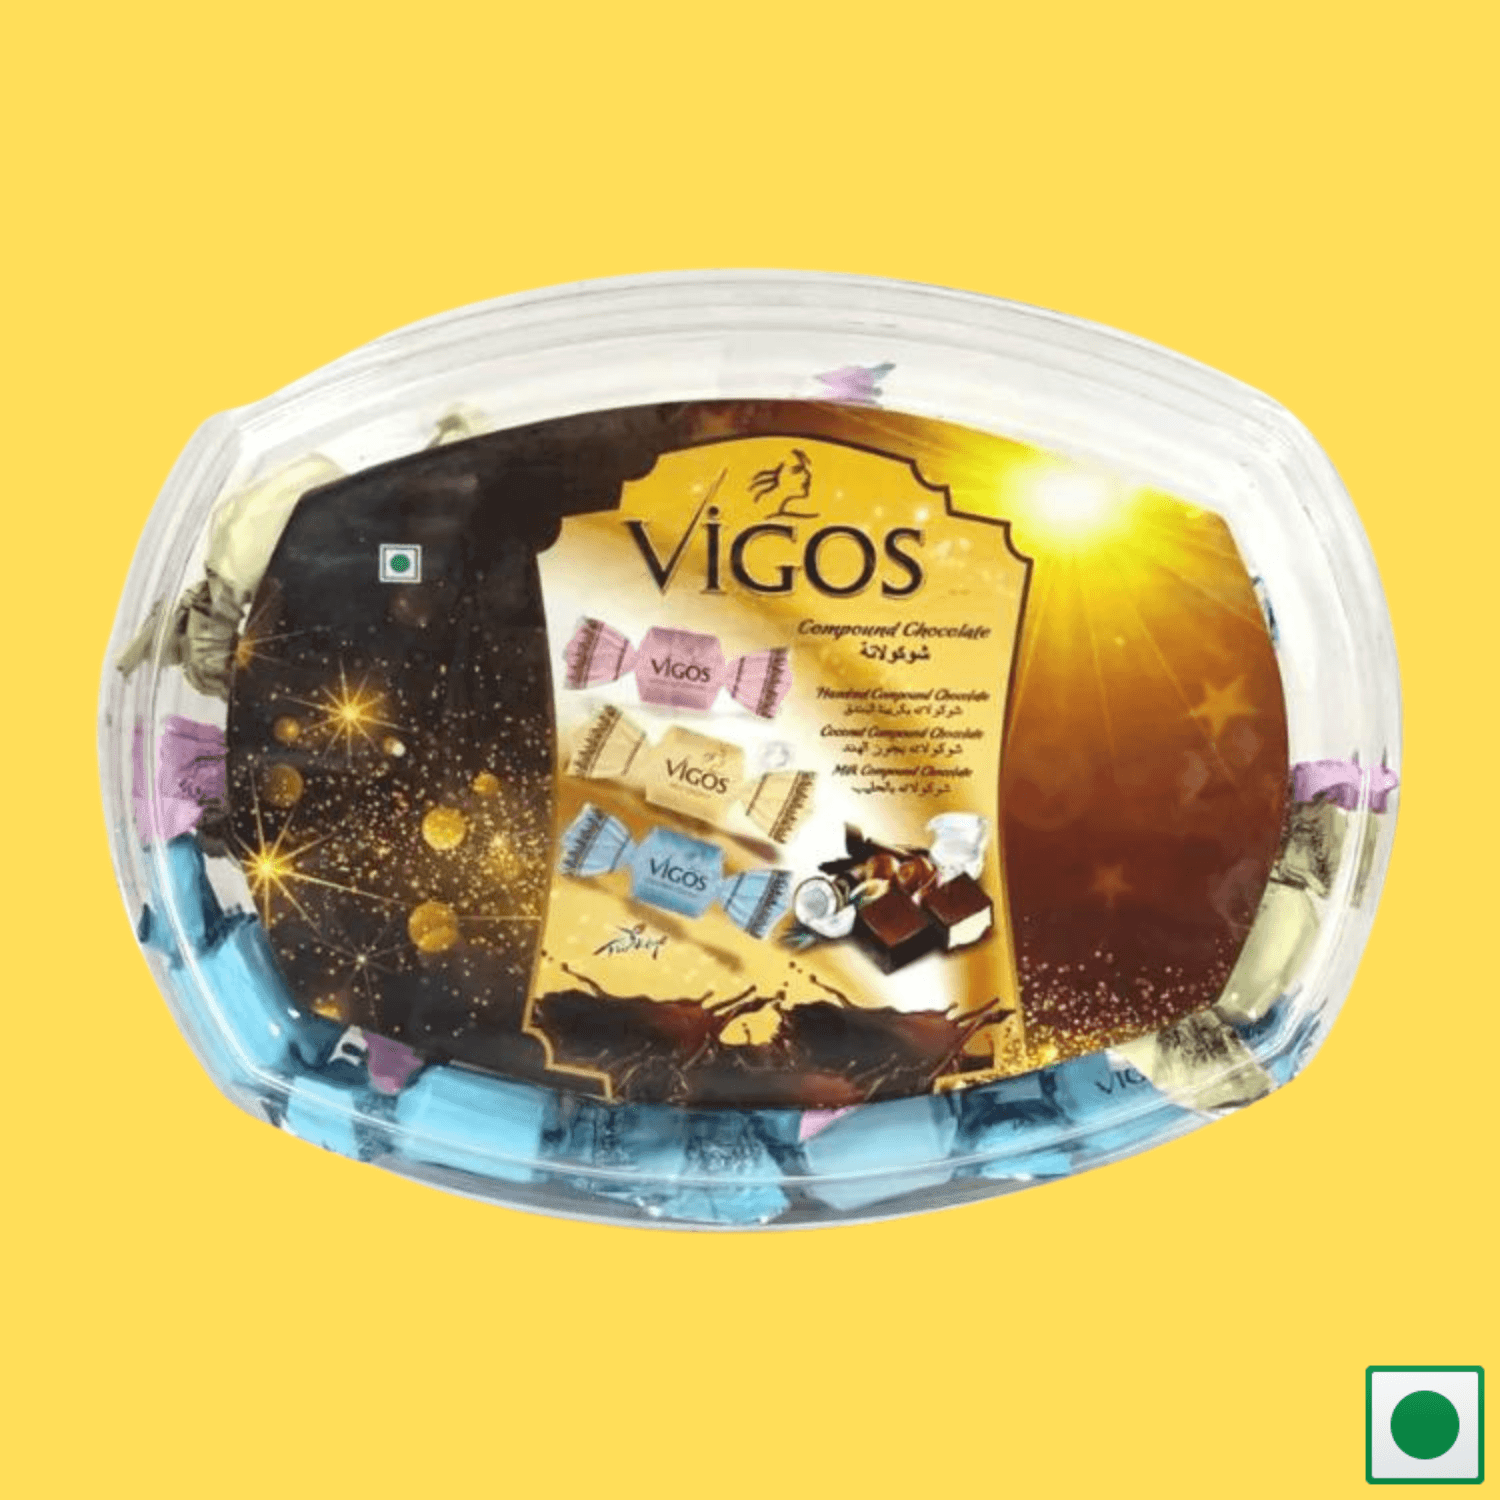 Vigos Chocolate Truffle Assortment Gift Pack CP 800 Box, 350g (Imported) - Super 7 Mart